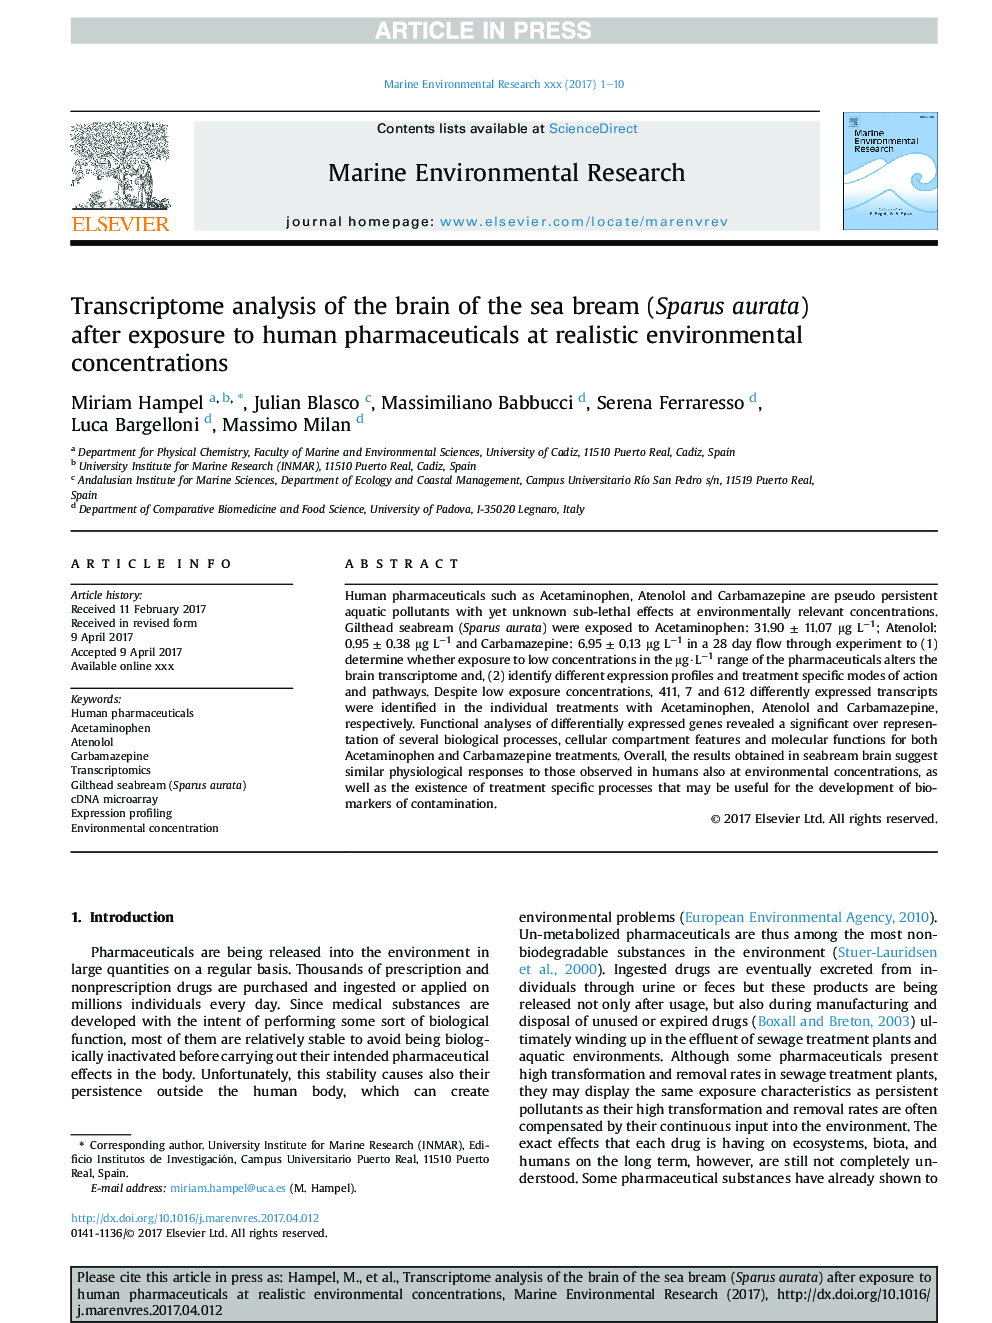 Transcriptome analysis of the brain of the sea bream (Sparus aurata) after exposure to human pharmaceuticals at realistic environmental concentrations